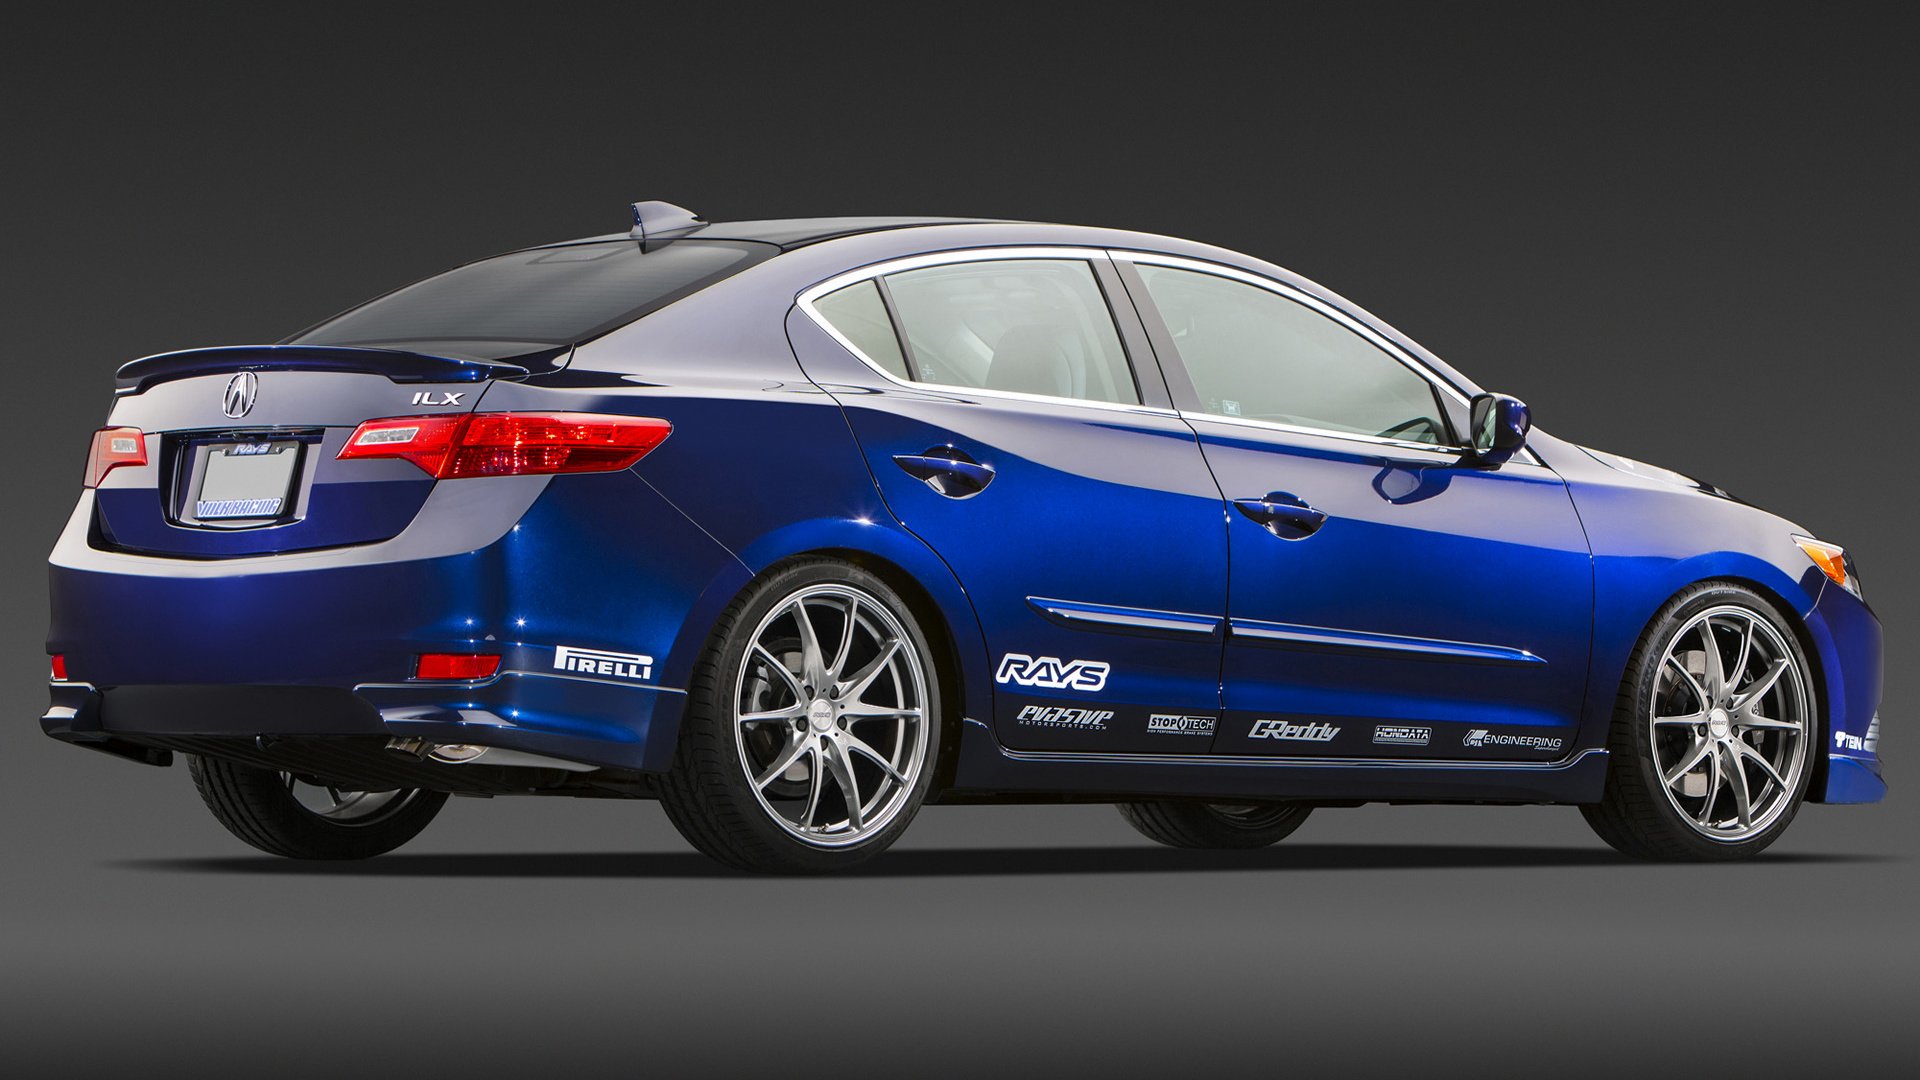 2012 Acura Ilx Street Build Hd Wallpaper Background Image 1920x1080